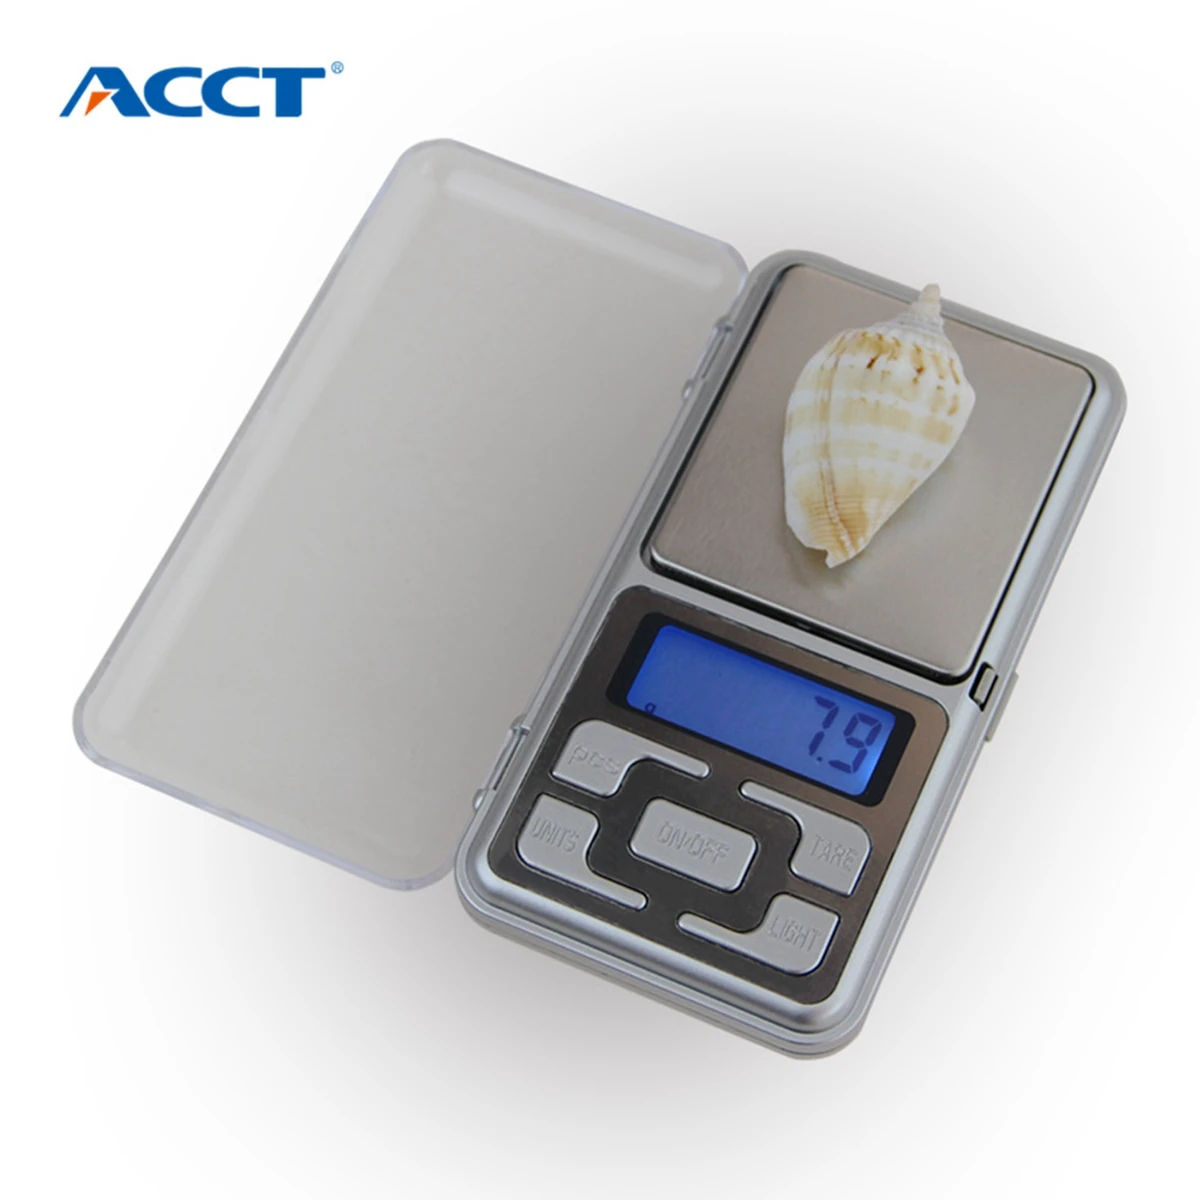 High Precision 500g 0.1g Electronic Weight Scale Digital Pocket Jewelry Diamond Balance With Retail Box Backlight For Kitchen